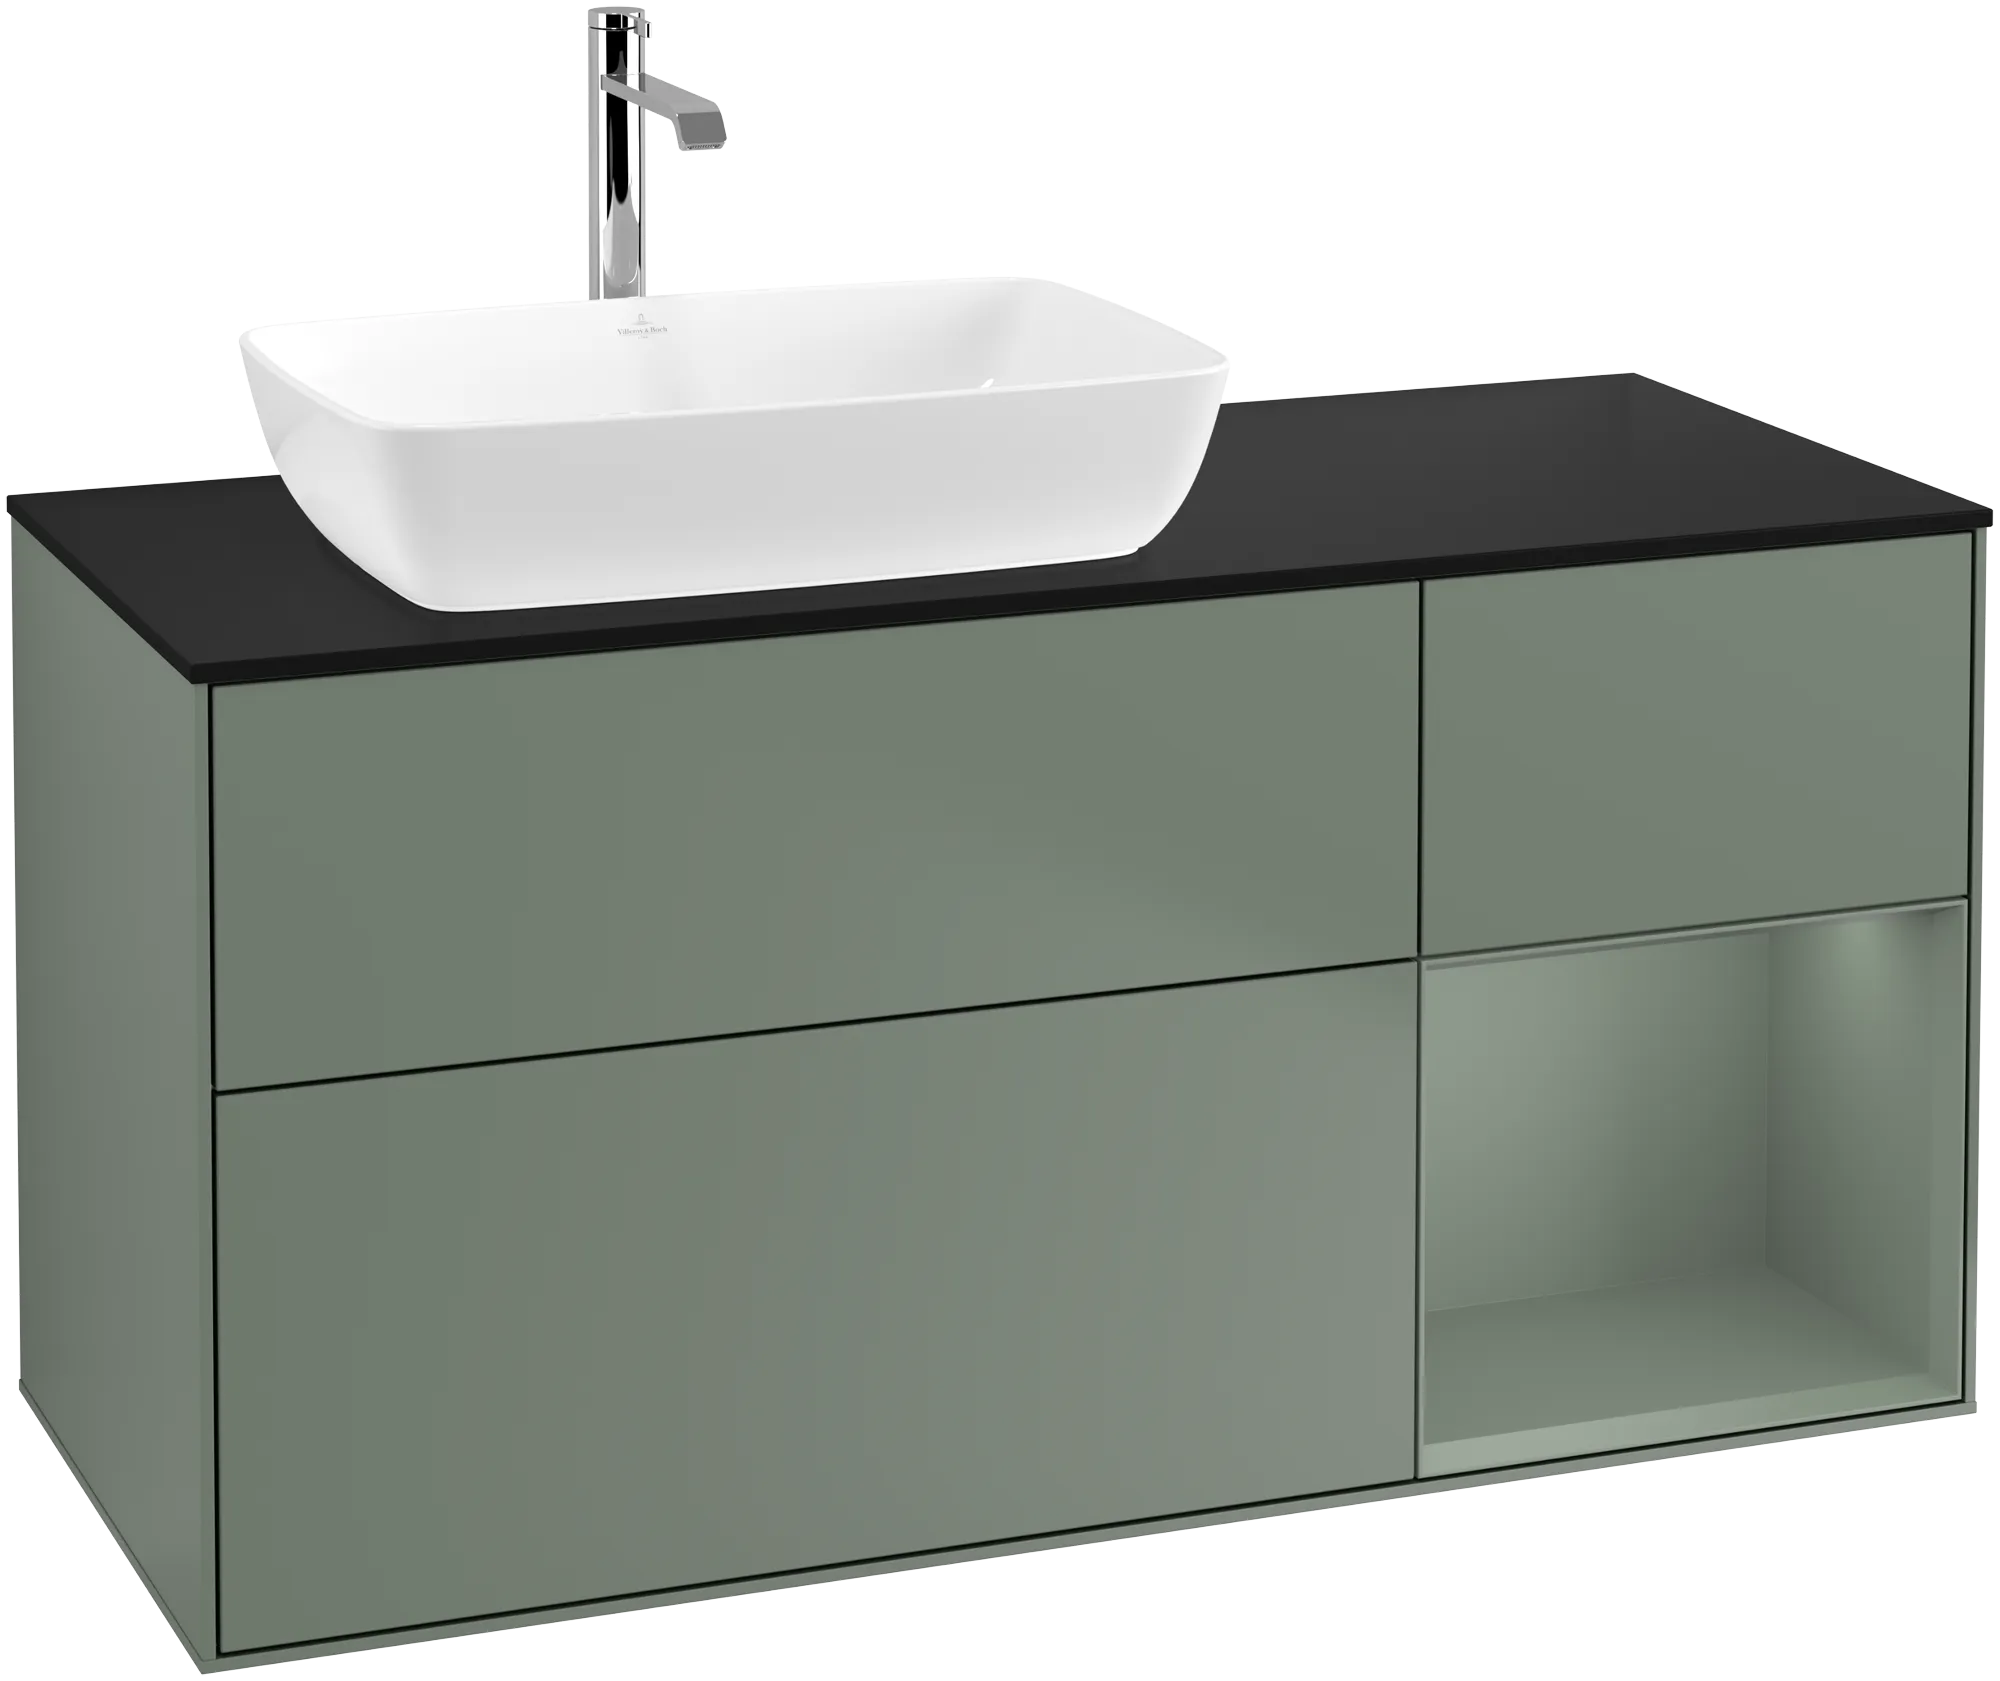 Obrázek VILLEROY BOCH Finion Vanity unit, with lighting, 3 pull-out compartments, 1200 x 603 x 501 mm, Olive Matt Lacquer / Olive Matt Lacquer / Glass Black Matt #G812GMGM